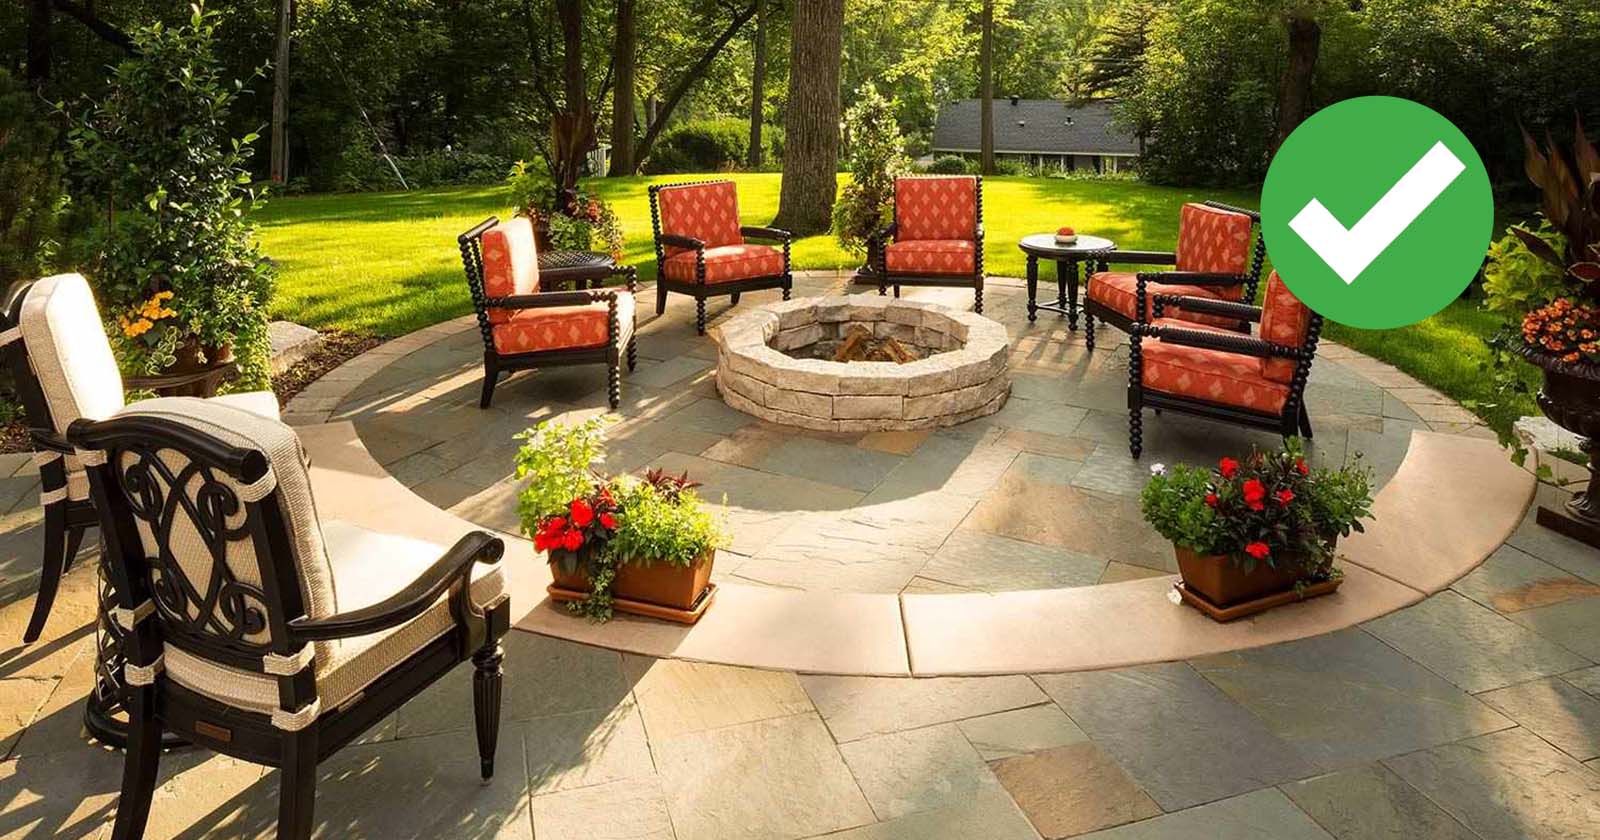 Fire Pit Design Safety and Decoration